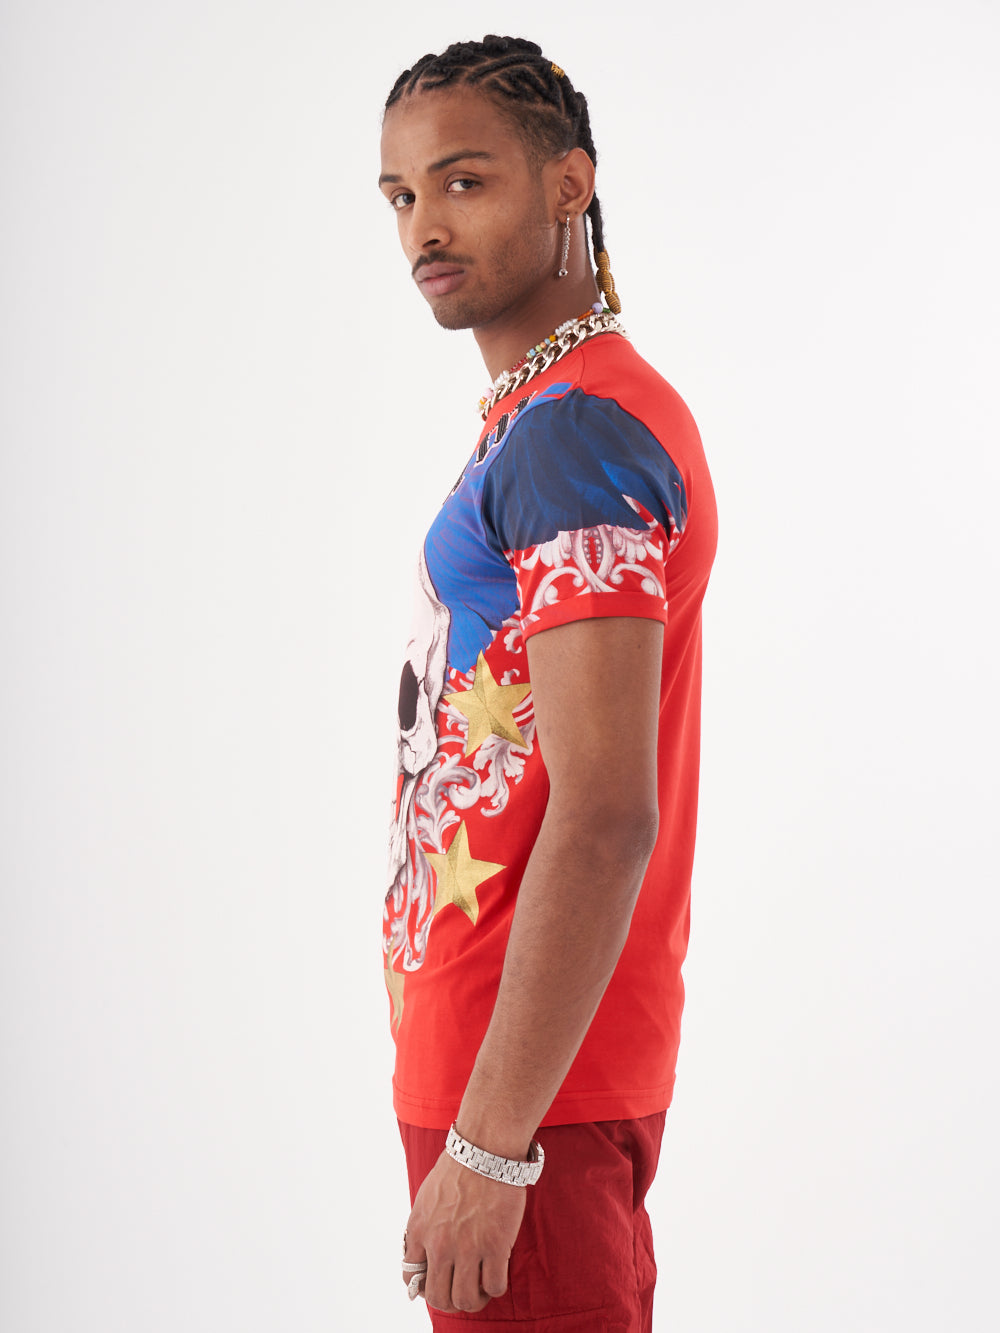 A man wearing the Euphoria t-shirt | red with a skeleton print.